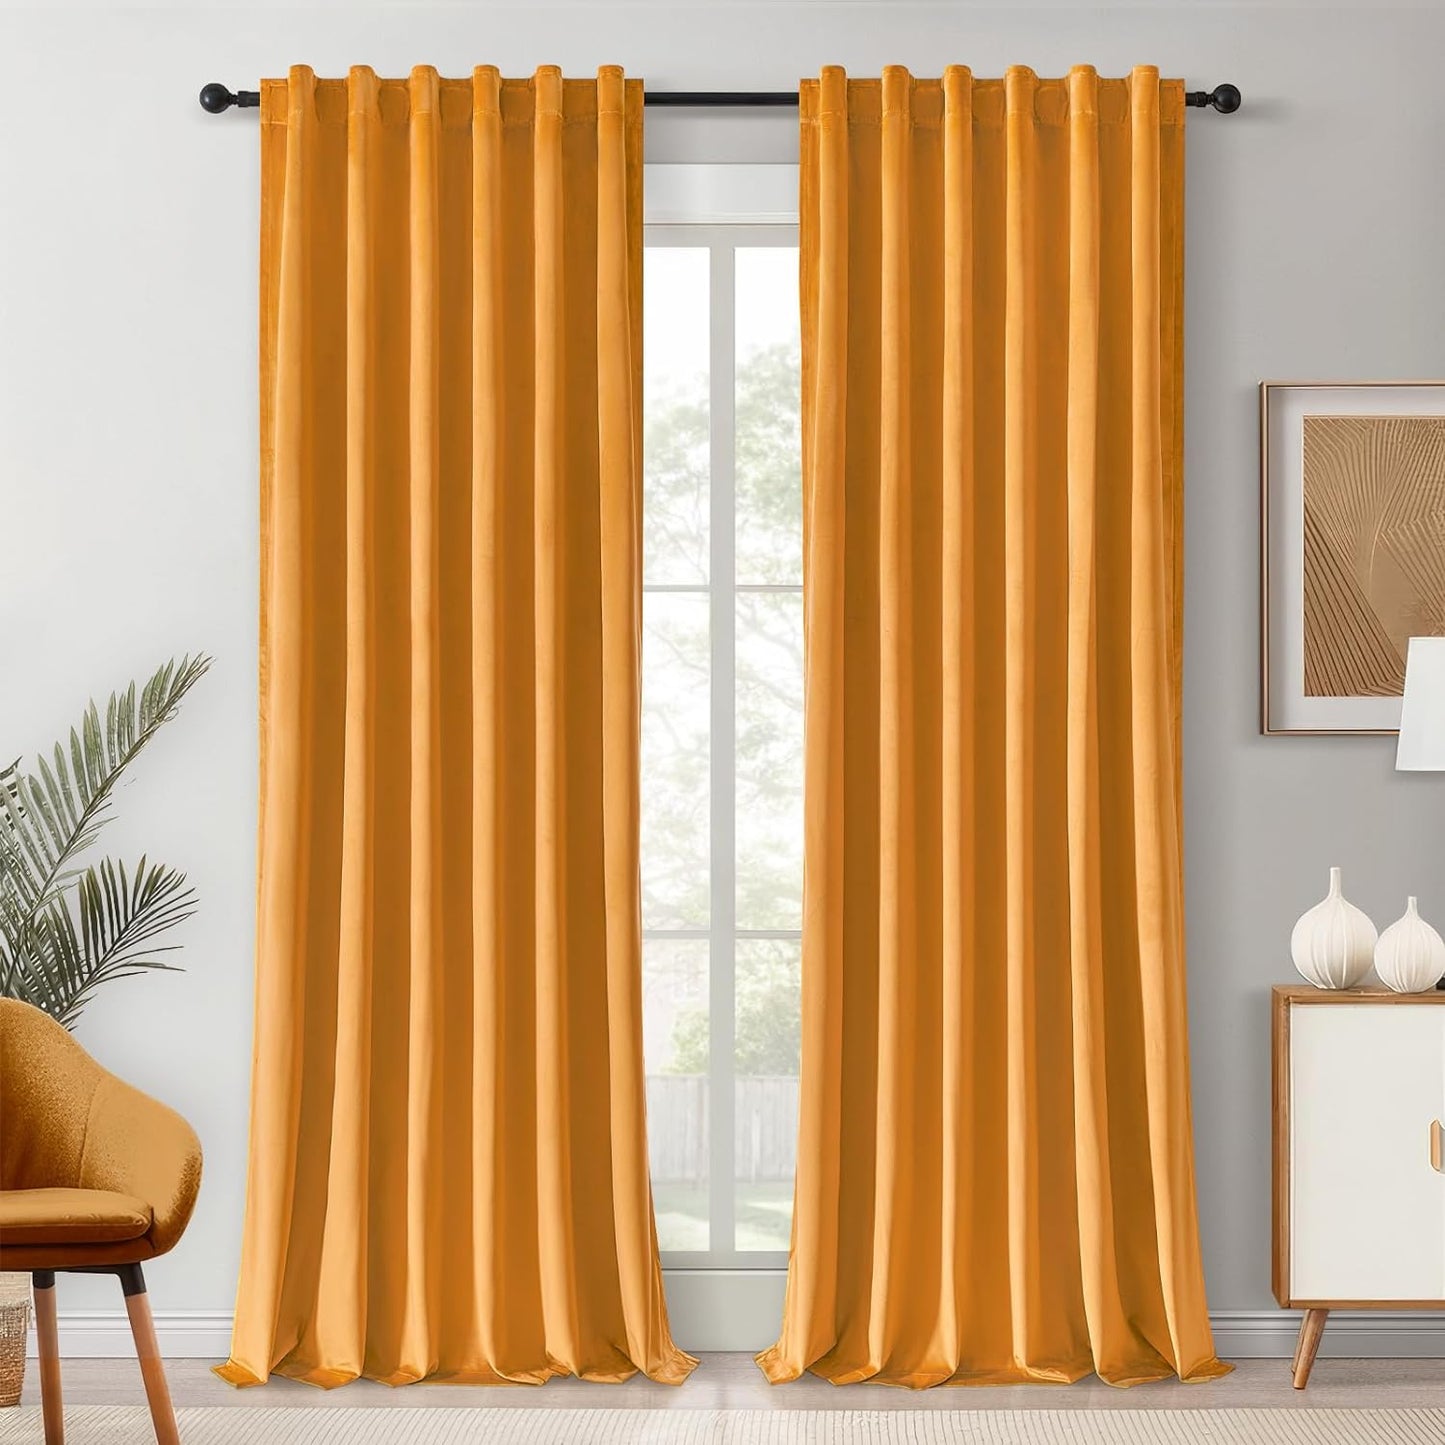 Topfinel Olive Green Velvet Curtains 84 Inches Long for Living Room,Blackout Thermal Insulated Curtains for Bedroom,Back Tab Modern Window Treatment for Living Room,52X84 Inch Length,Olive Green  Top Fine Mustard Yellow 52" X 80" 